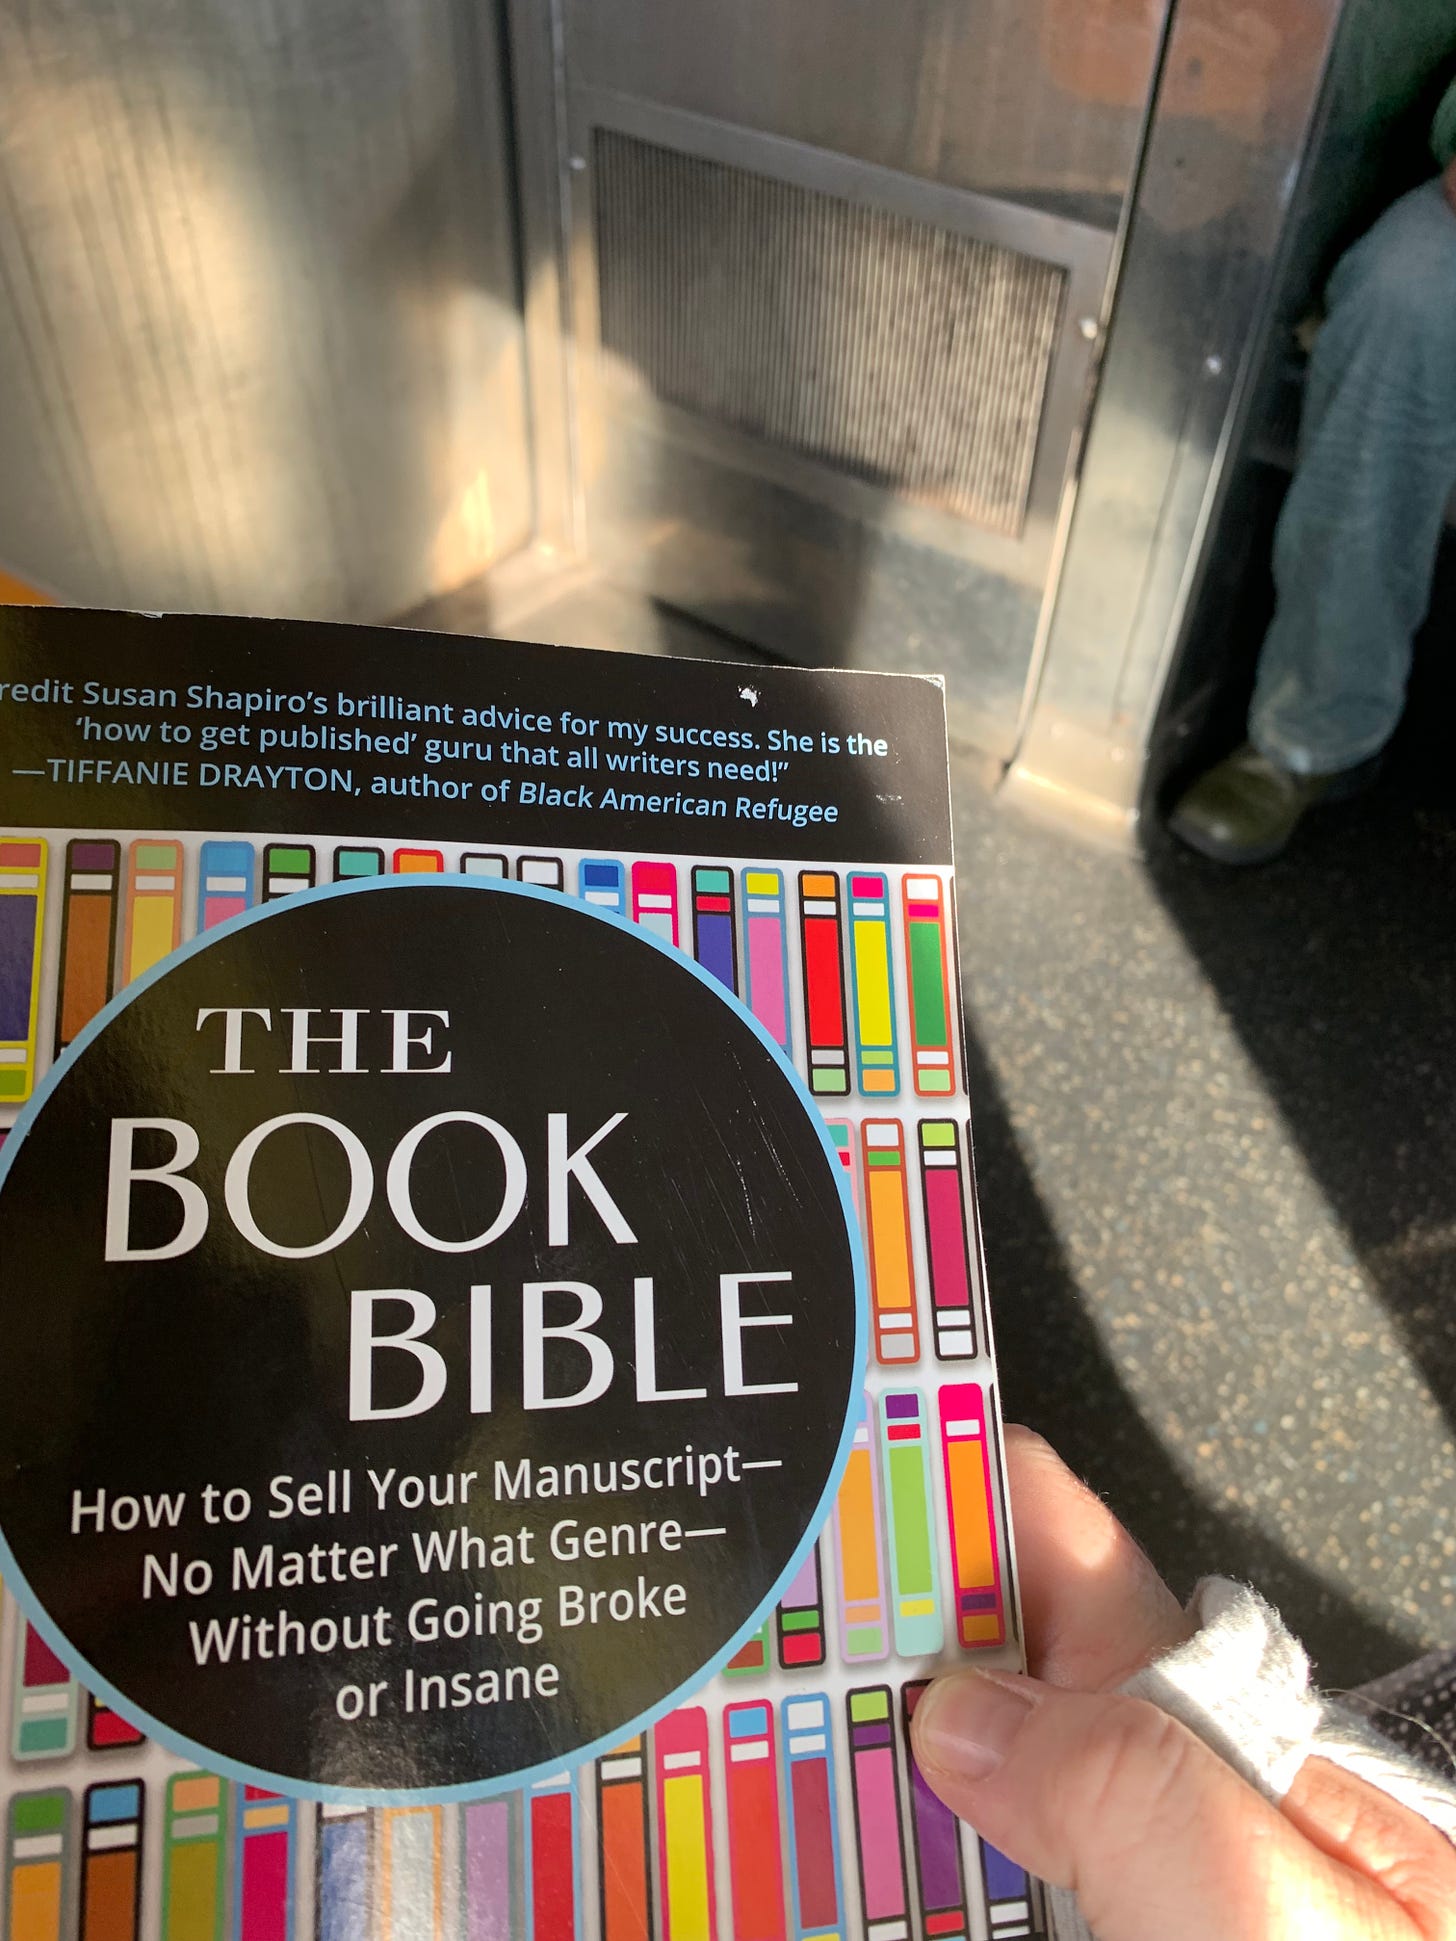 A picture of The Book Bible on a train